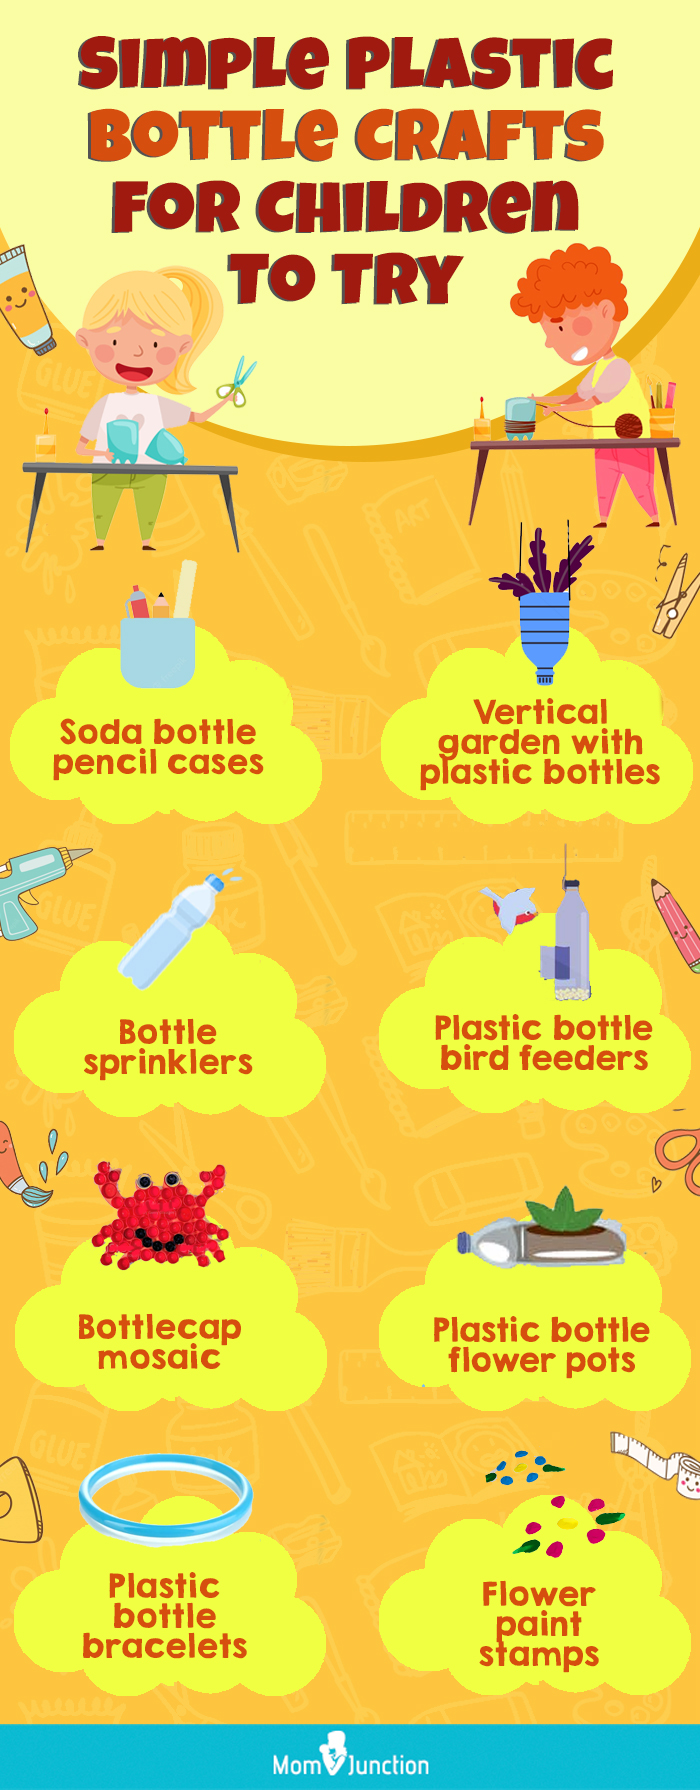 simple plastic bottle crafts for children to try (infographic)